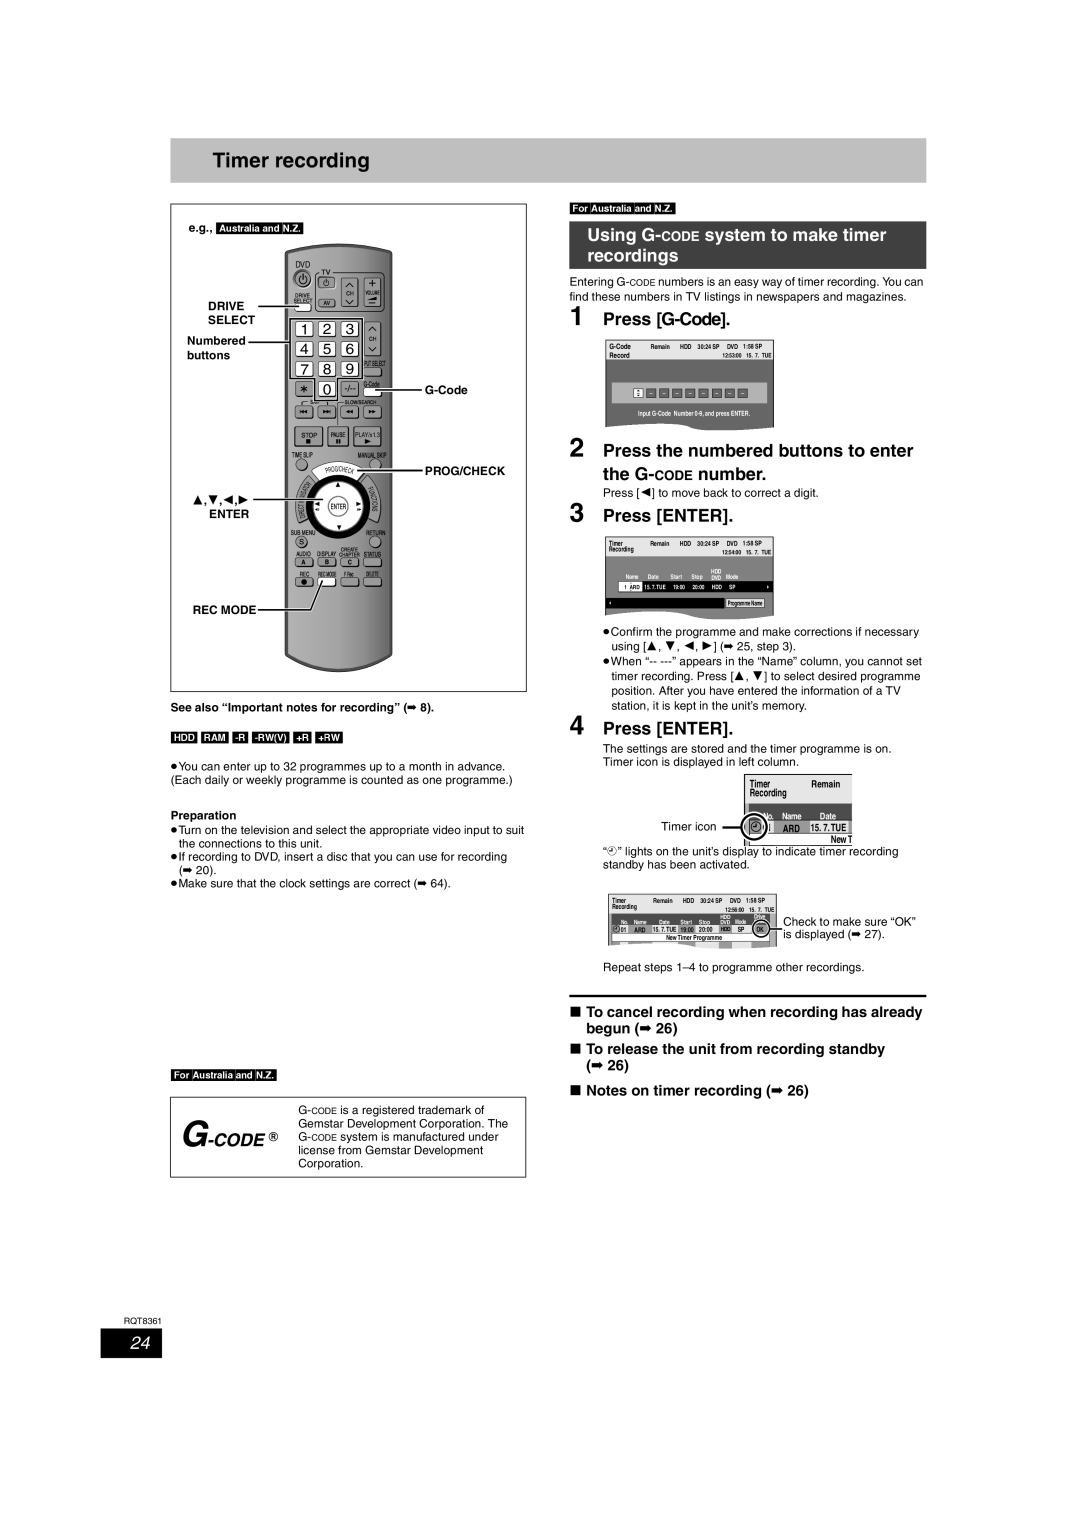 Philips DMR-EH55 Timer recording, Using G-CODE system to make timer recordings, Press G-Code, Press ENTER, Timer icon 